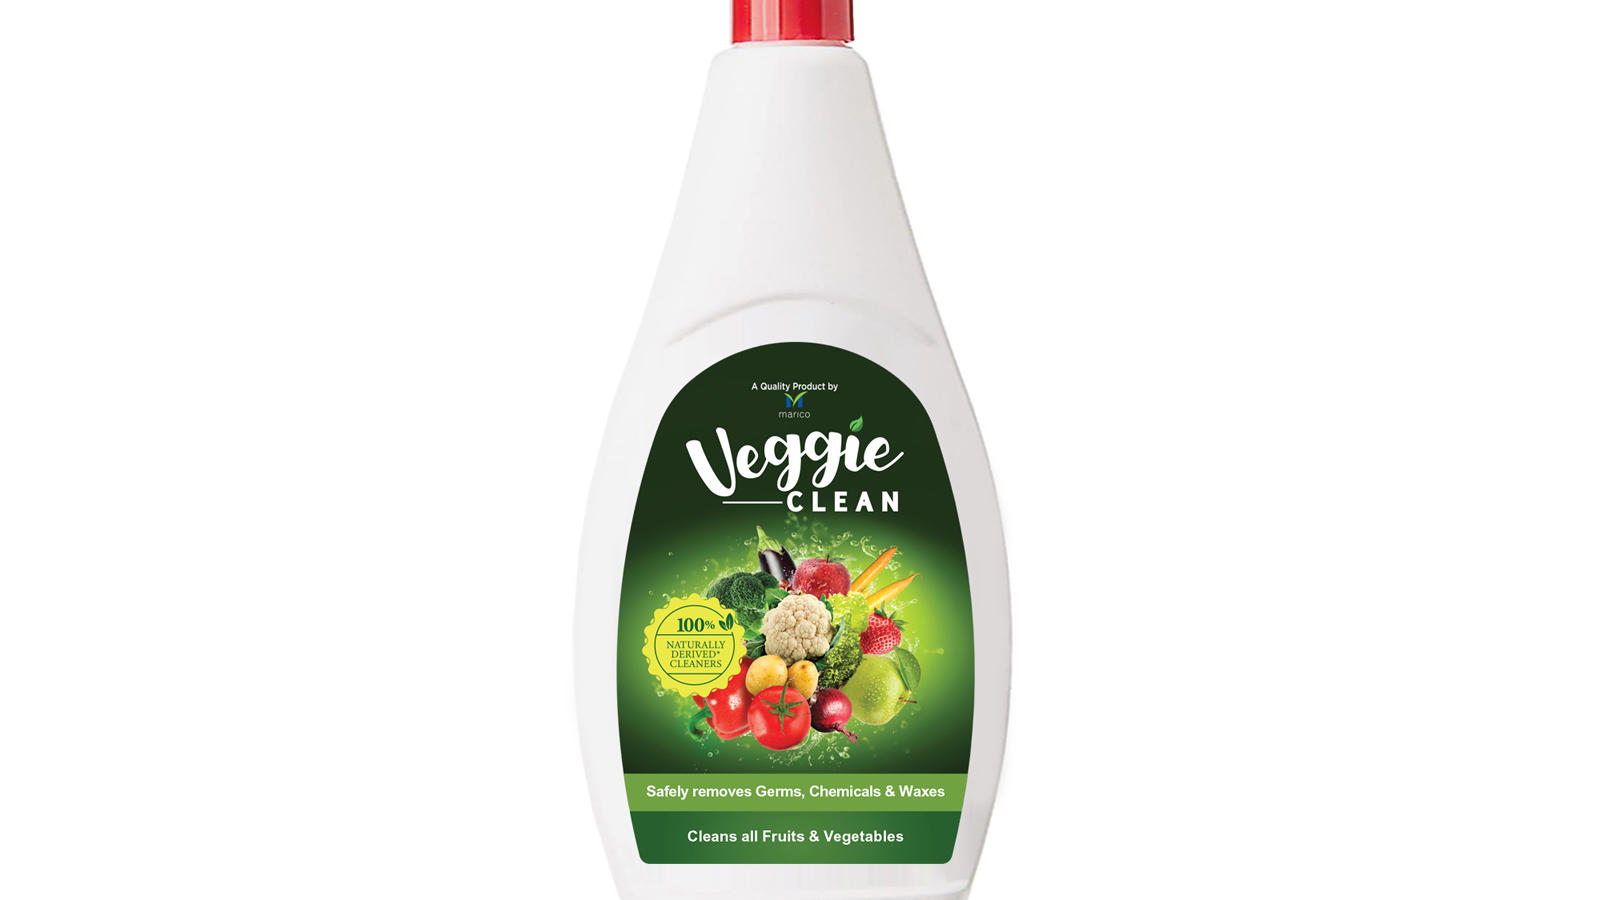 What's the Deal with Fruit and Vegetable Wash?